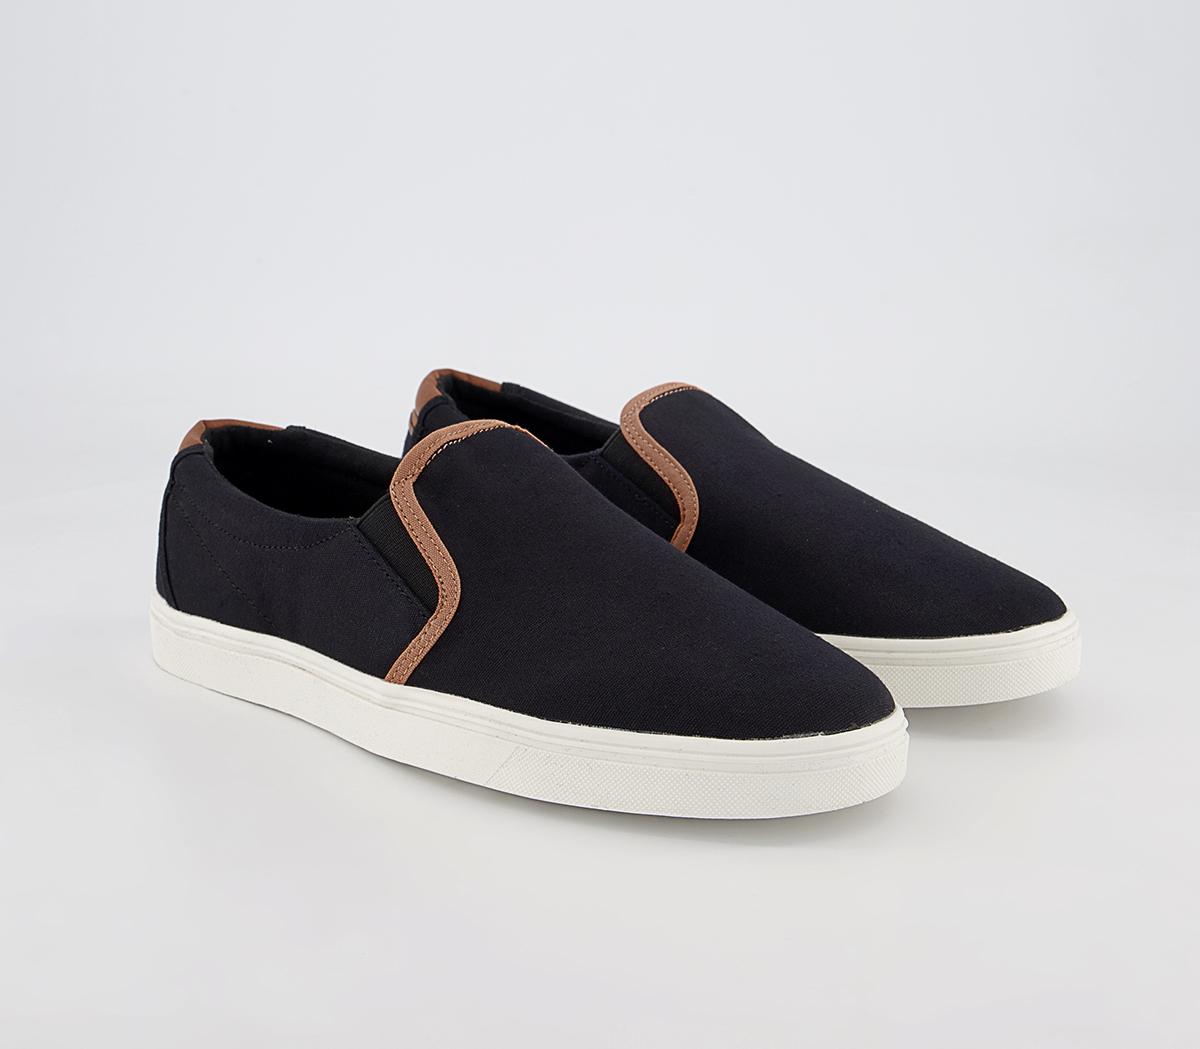 OFFICE Claxton Contrast Binding Slip Ons Black - Men's Casual Shoes